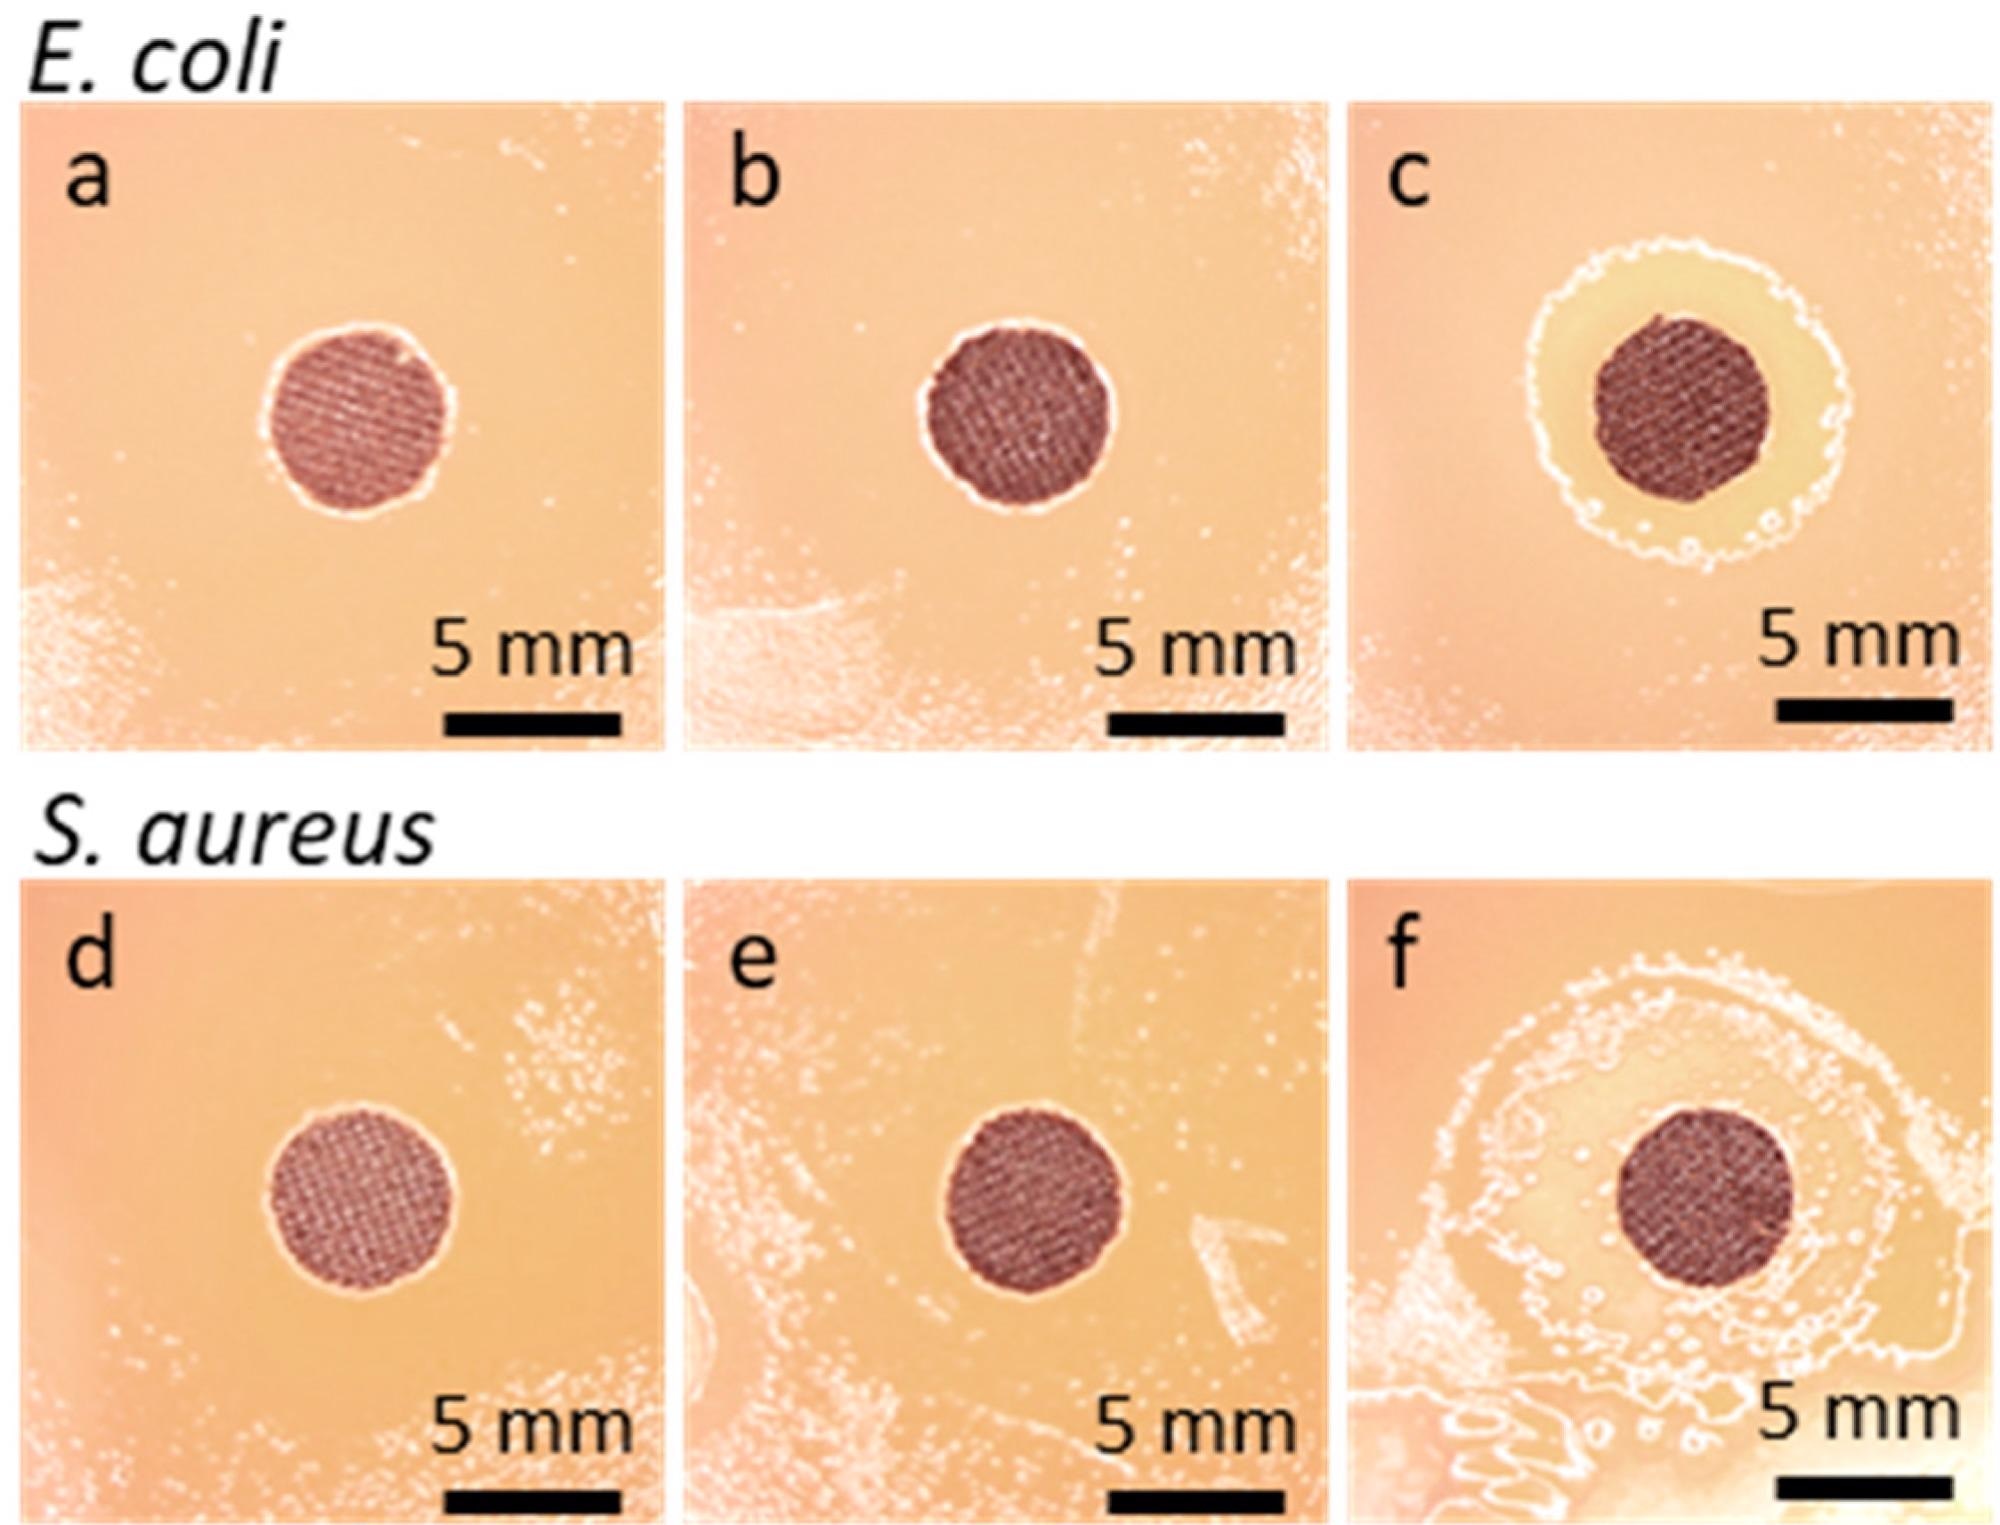 Disk specimens of cotton fabric on bacteria inoculated agar after 48 h incubation: E. coli (a) GO-coated, (b) rGO-coated, (c) Ag°/rGO-coated; S. aureus, (d) GO-coated, (e) rGO-coated, (f) Ag°/rGO-coated.